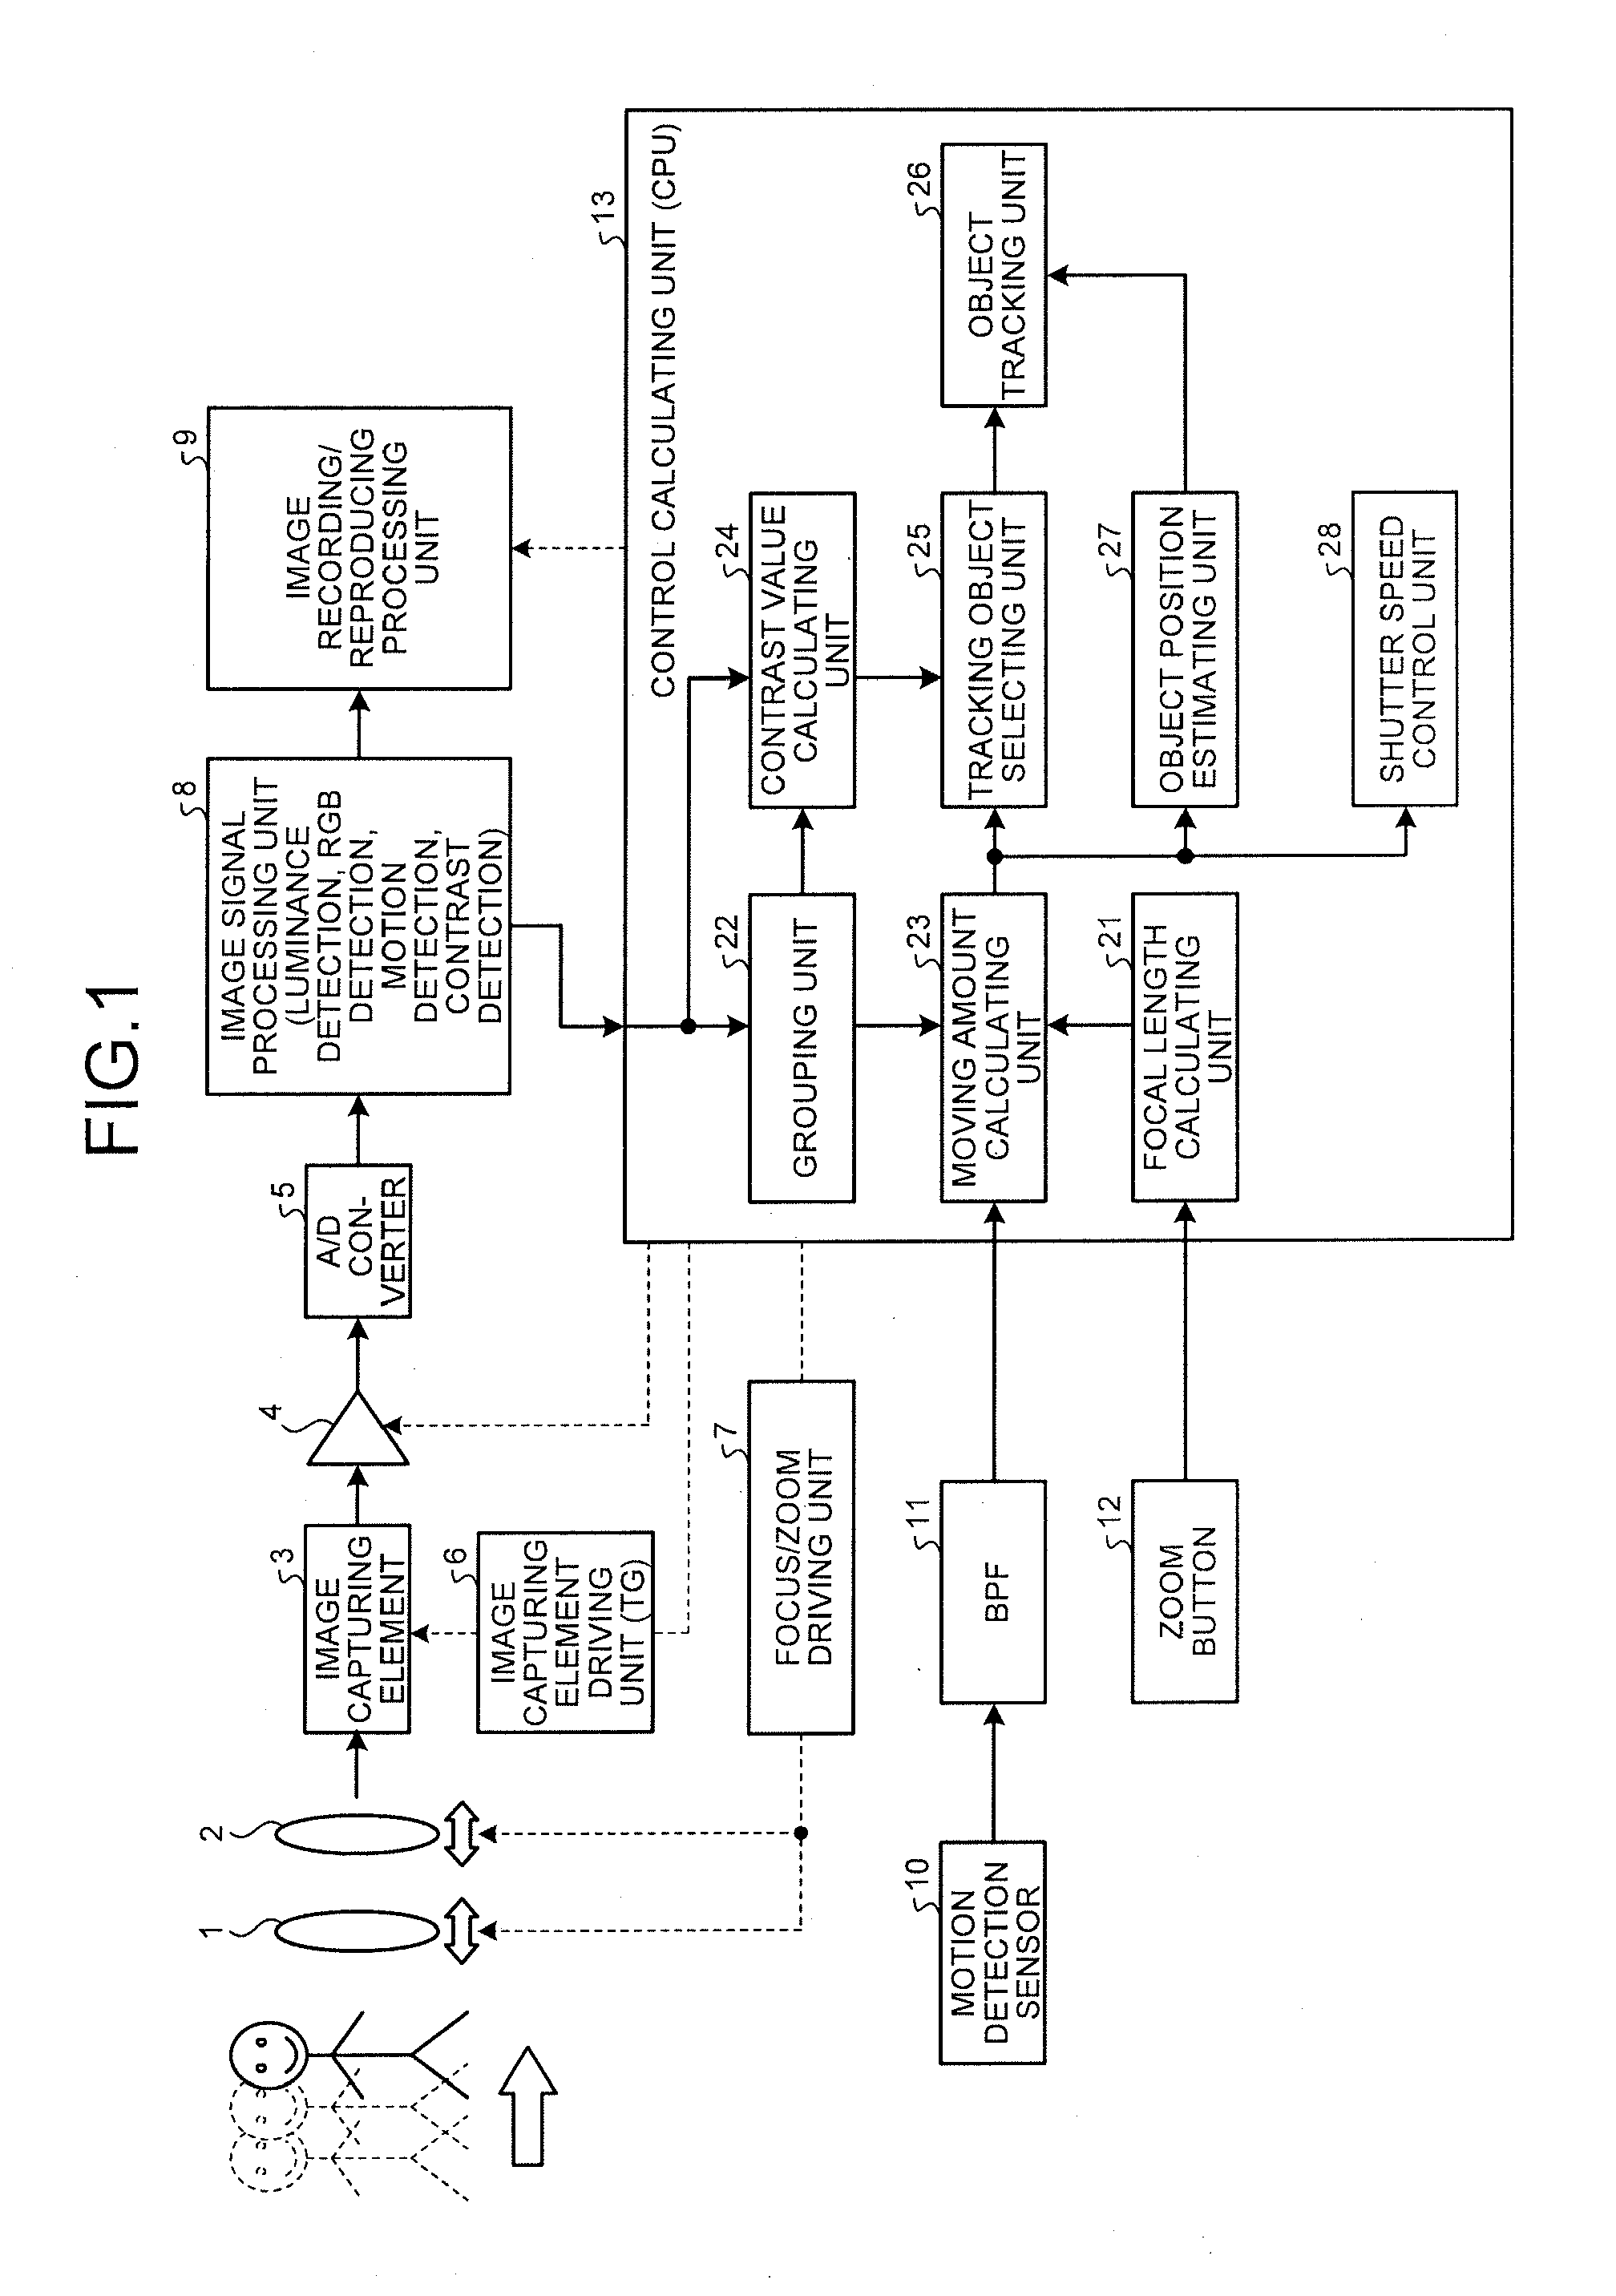 Image capturing apparatus, method of detecting tracking object, and computer program product